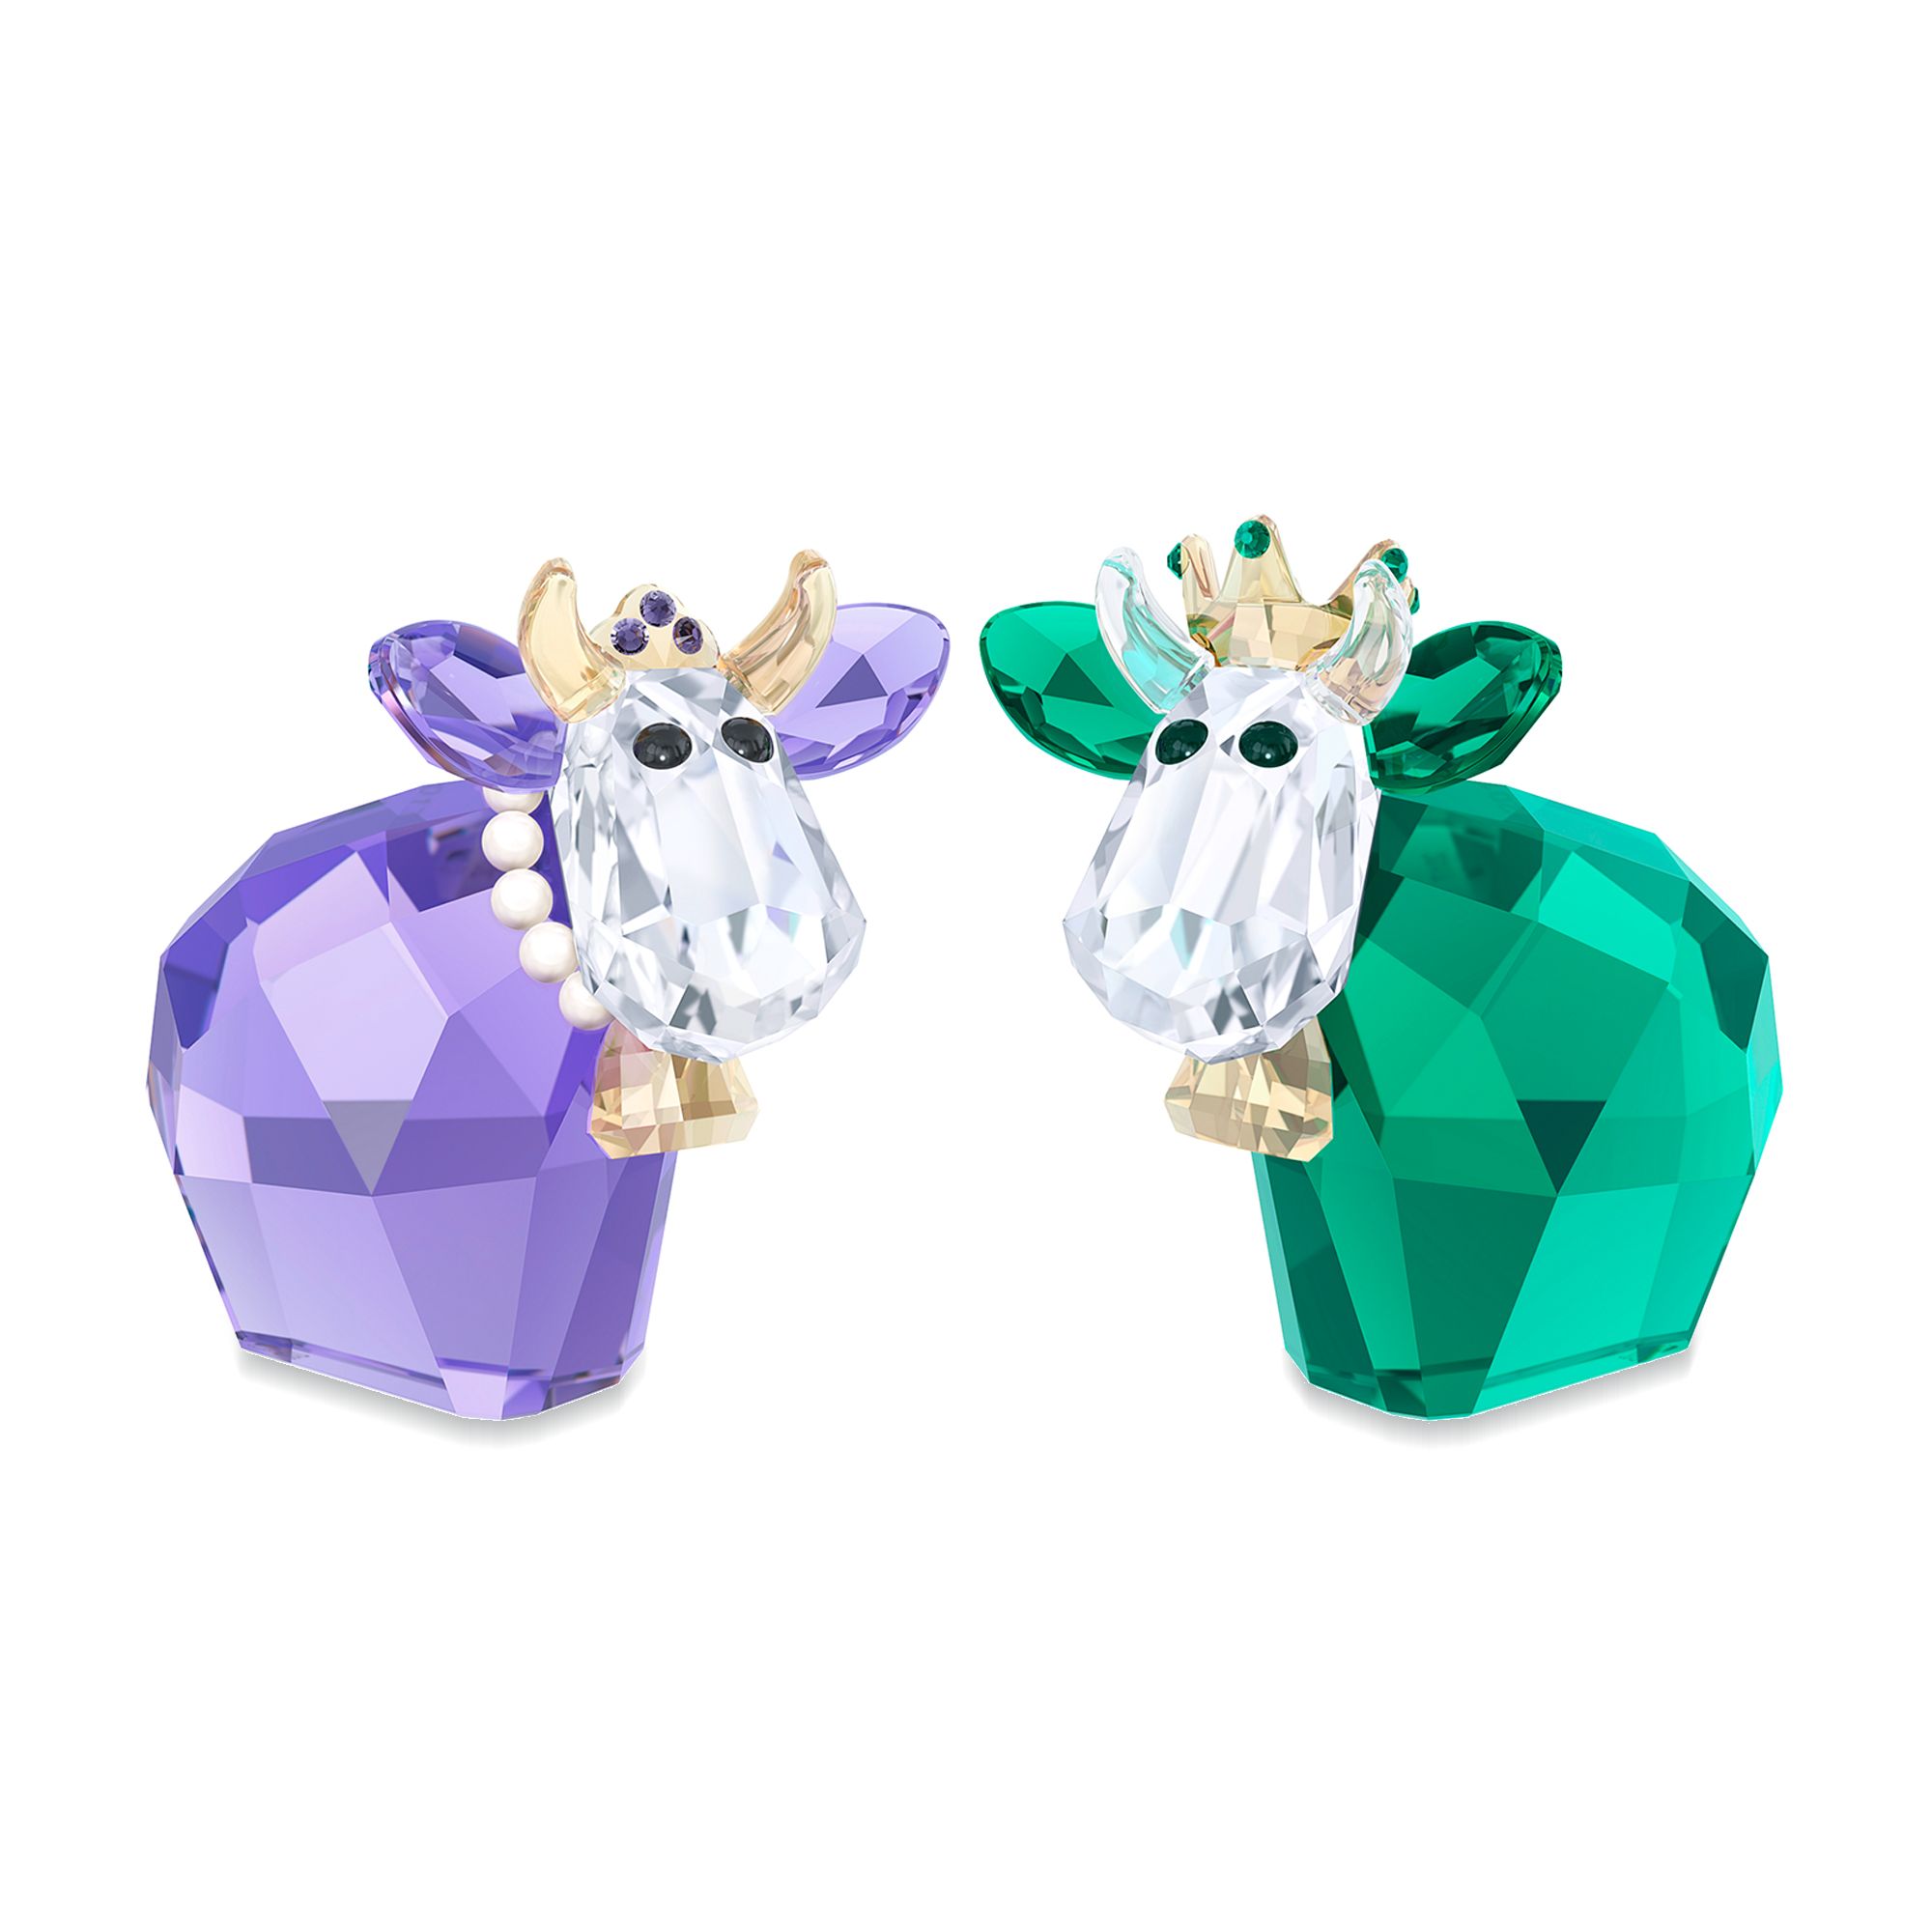 Swarovski Crystal "King and Queen Mo" Purple and Green Crystal Set: Two  Figurines - 2017 Limited Edition | Ross-Simons